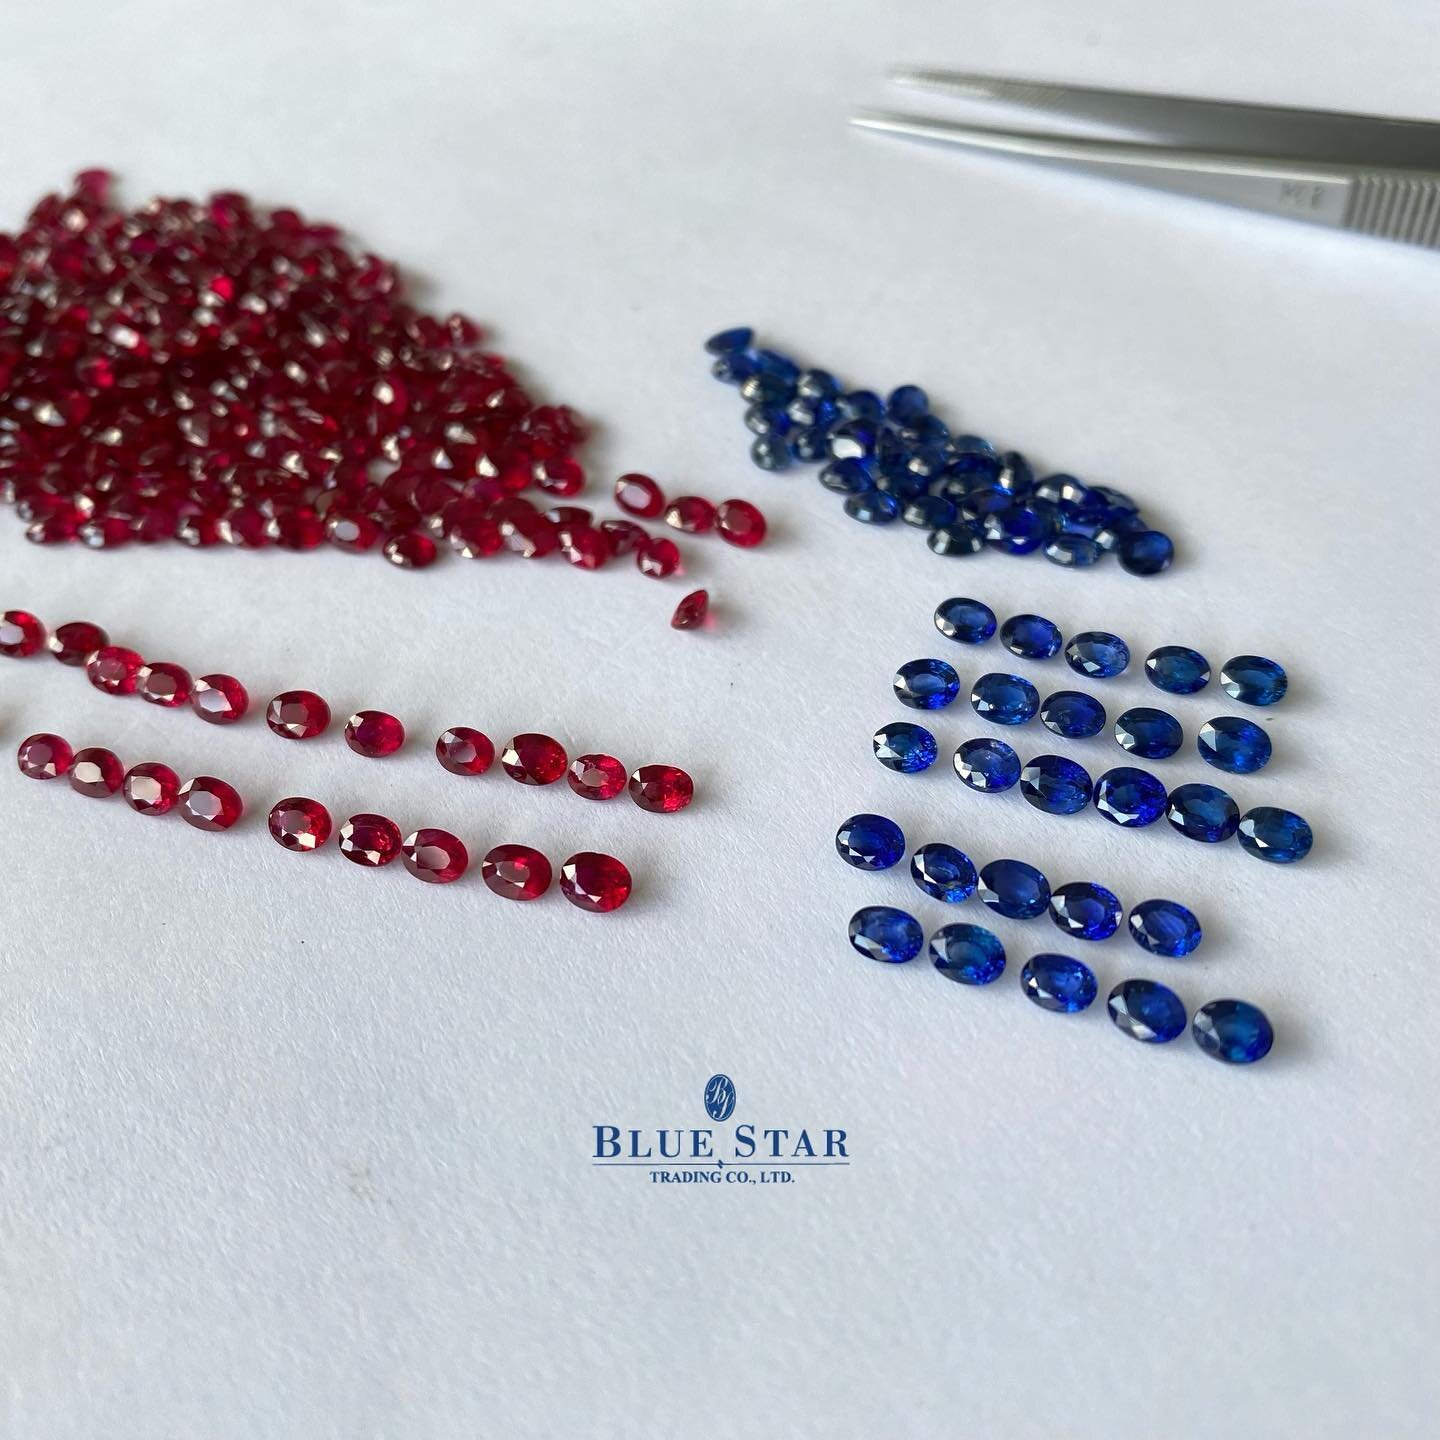 Ruby &amp; Sapphire oval 4x3 commercial quality.
🔴🔴🔴🔵🔵🔵

#ruby #sapphire #ovalsapphire #gemstones #colorstone #ovalruby #calibratedsapphires #gem #ovals4x3